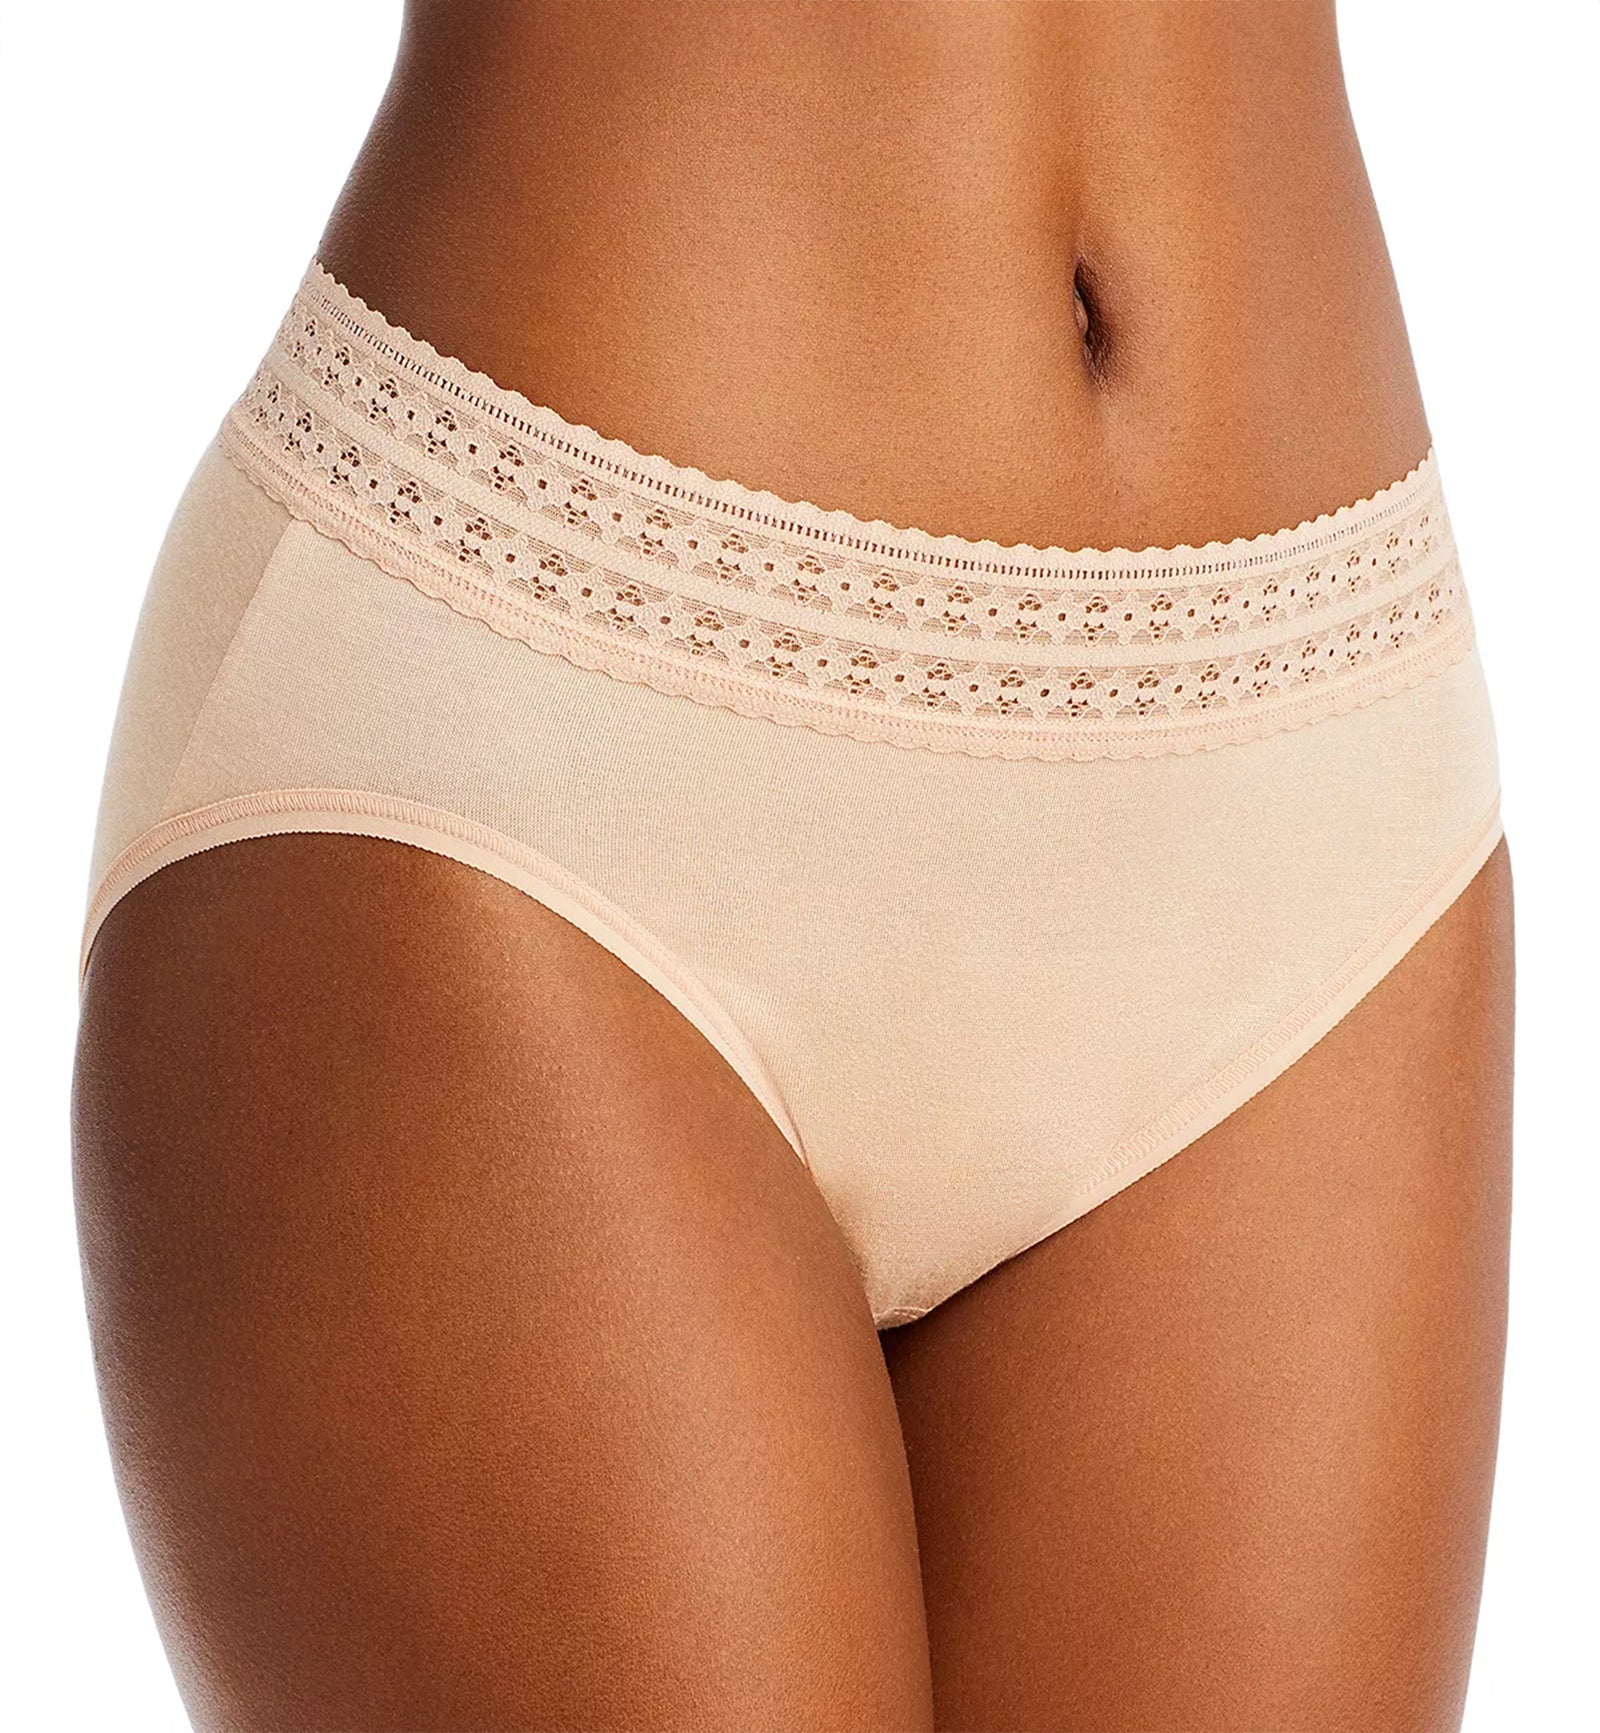 Hanky Panky DreamEase French Brief (632464),Small,Chai - Chai,Small